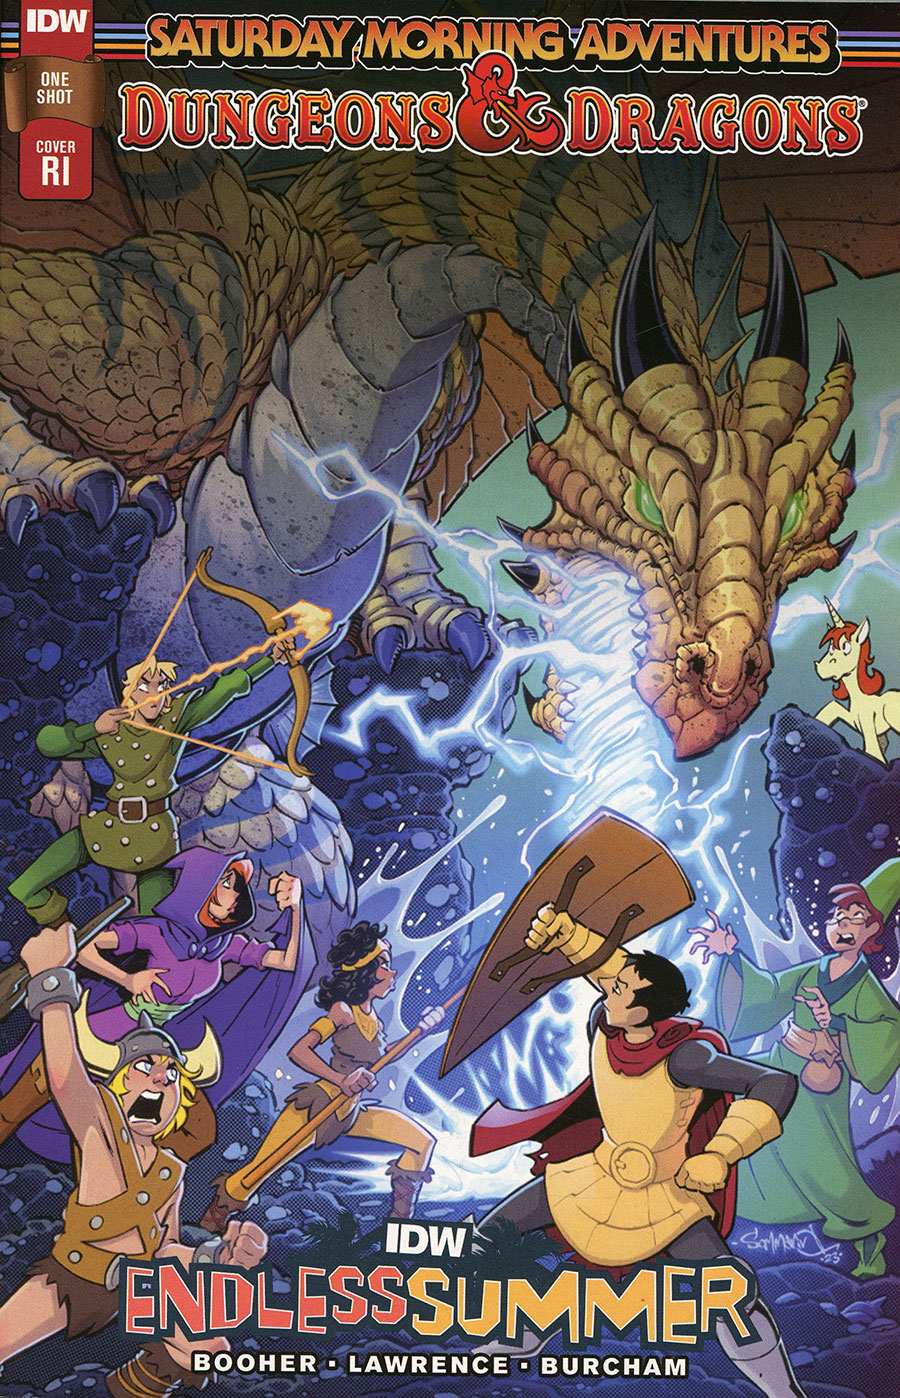 IDW Endless Summer Dungeons & Dragons Saturday Morning Adventures #1 (One Shot) Cover D Incentive Jon Sommariva Variant Cover